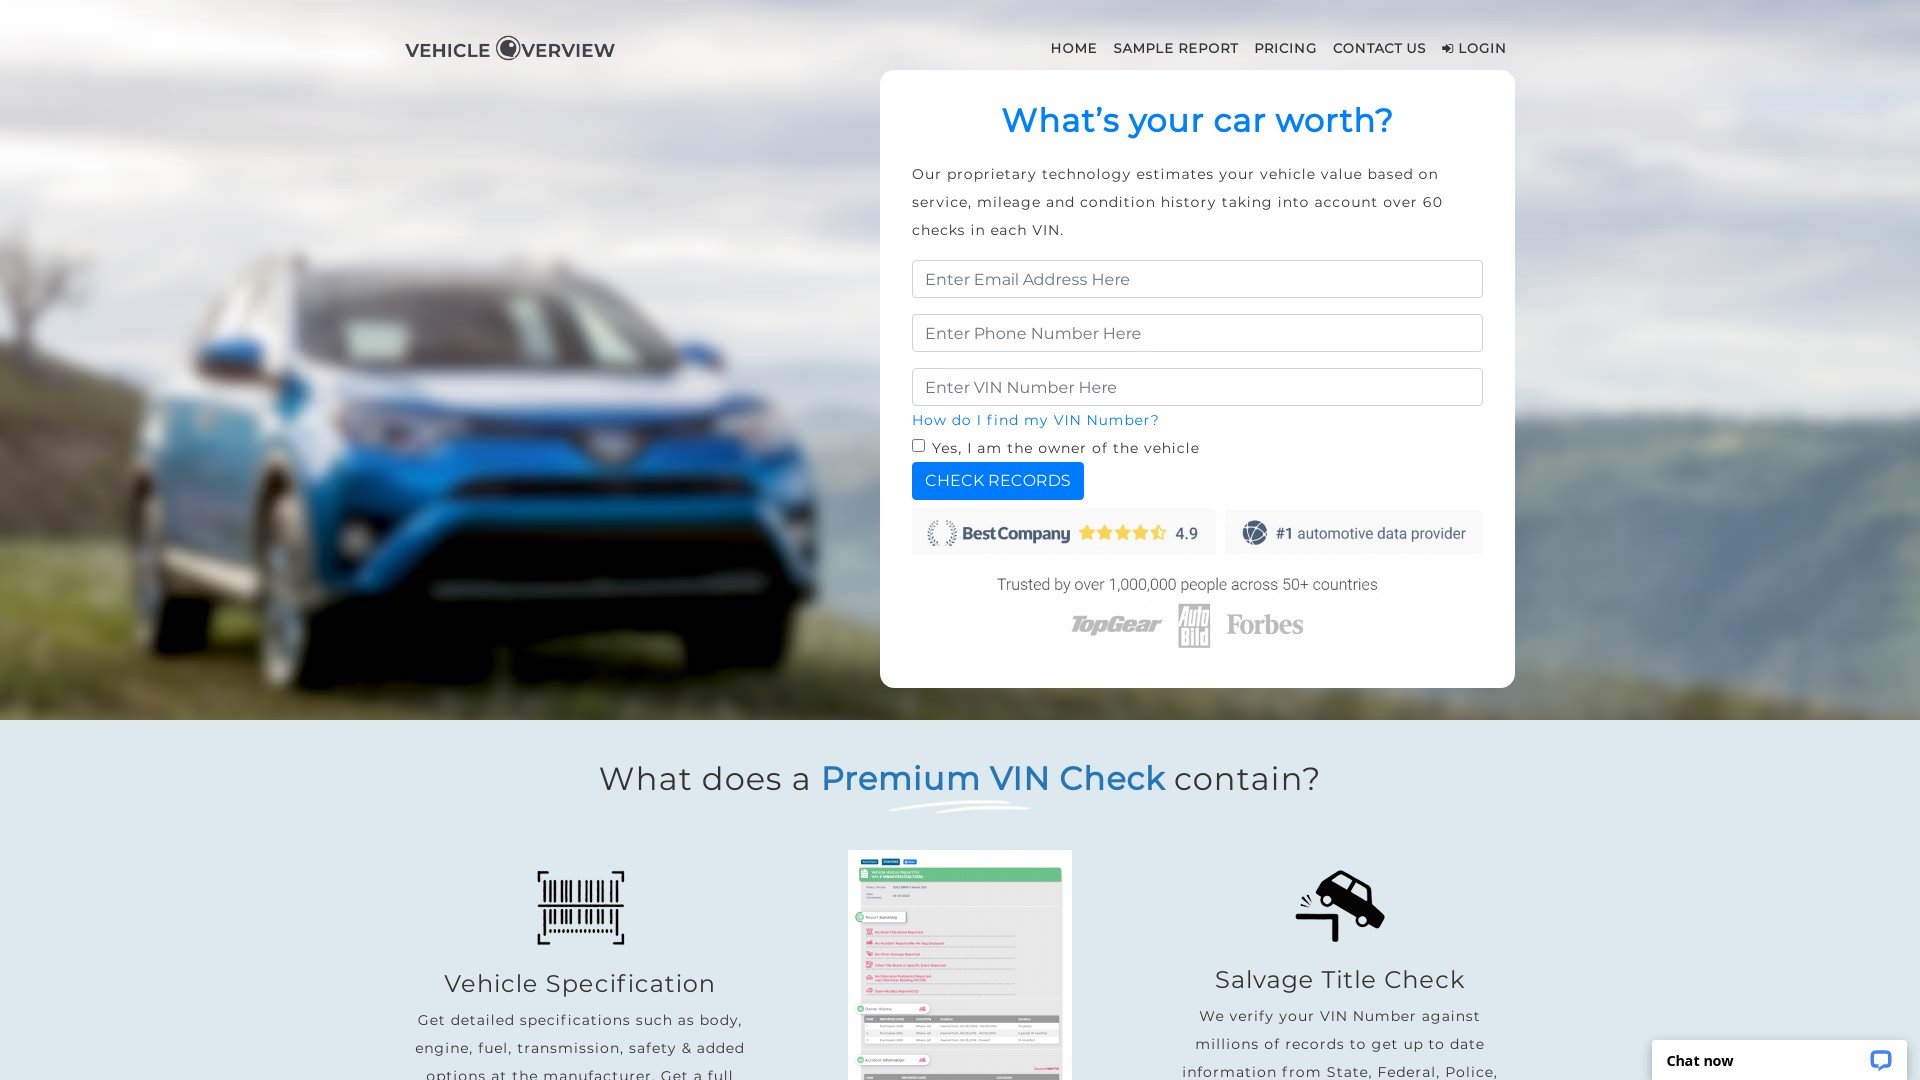 Vehicle Overview at vehicleoverview.com